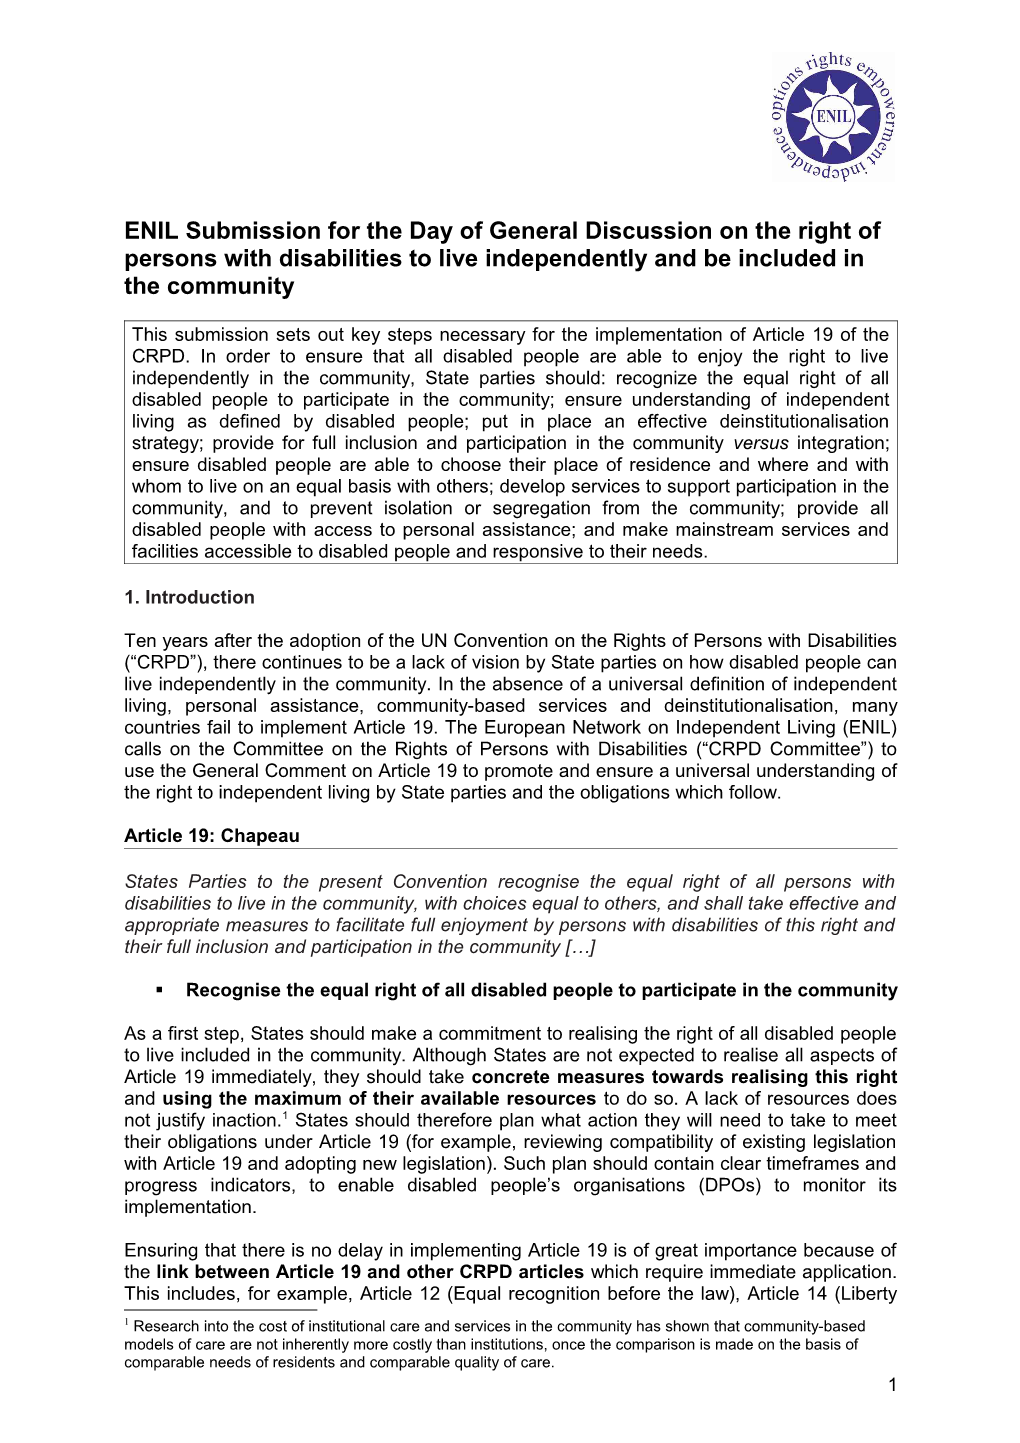 ENIL Submission for the Day of General Discussion on the Right of Persons with Disabilities